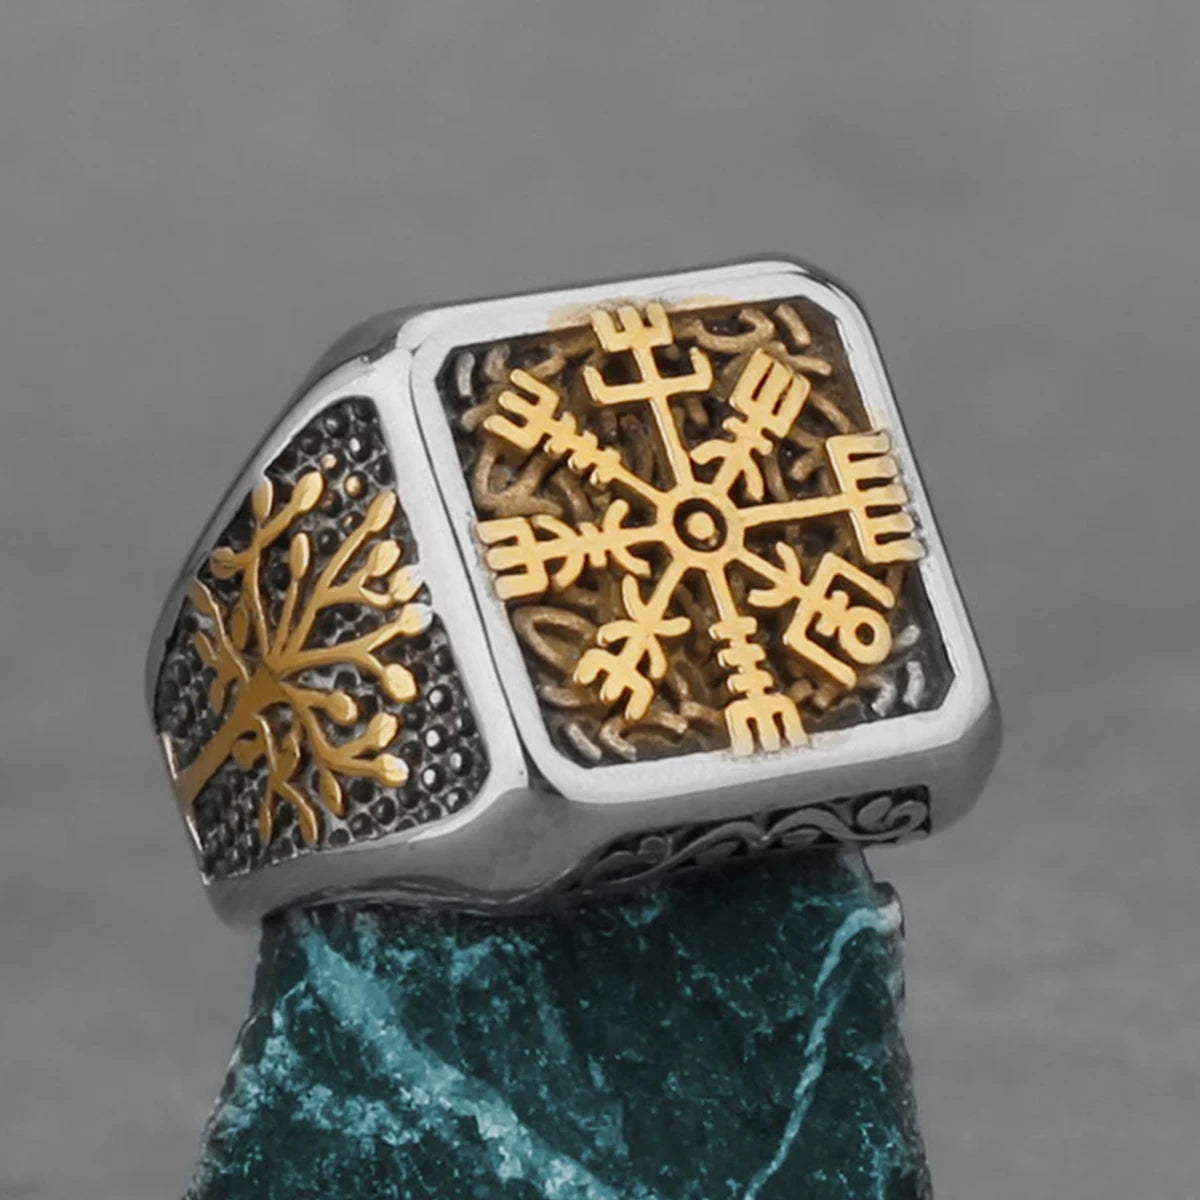 Nordic Viking Stainless Steel Ring - Anchor Compass Tree of Life Rune Amulet Wolf Finger Jewelry VK-3 Men's Rings